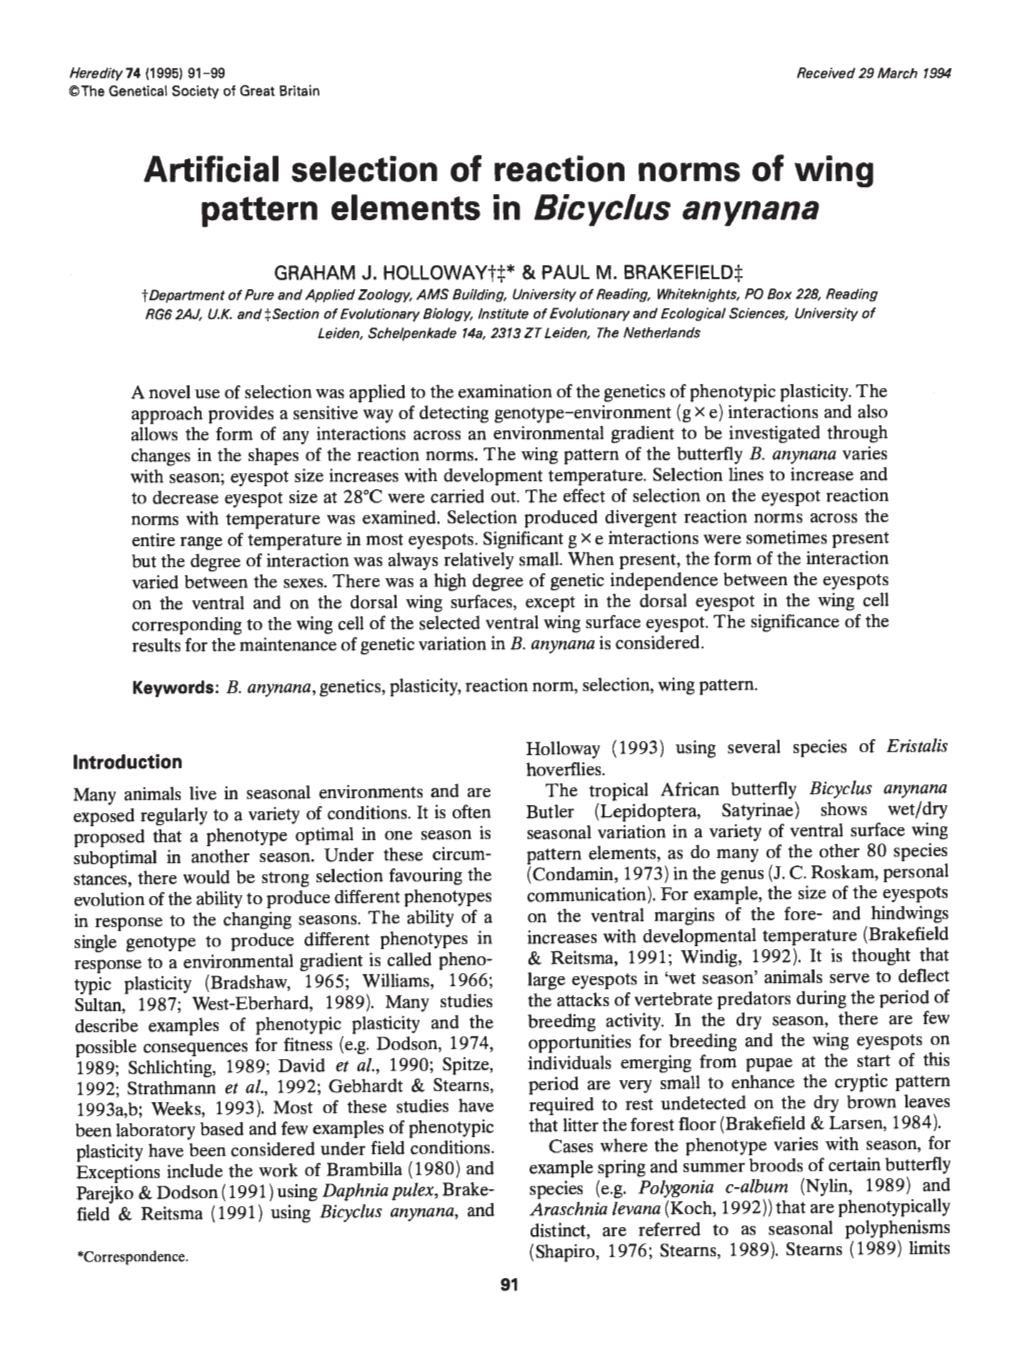 Artificial Selection of Reaction Norms of Wing Pattern Elements in Bicyclus Anynana